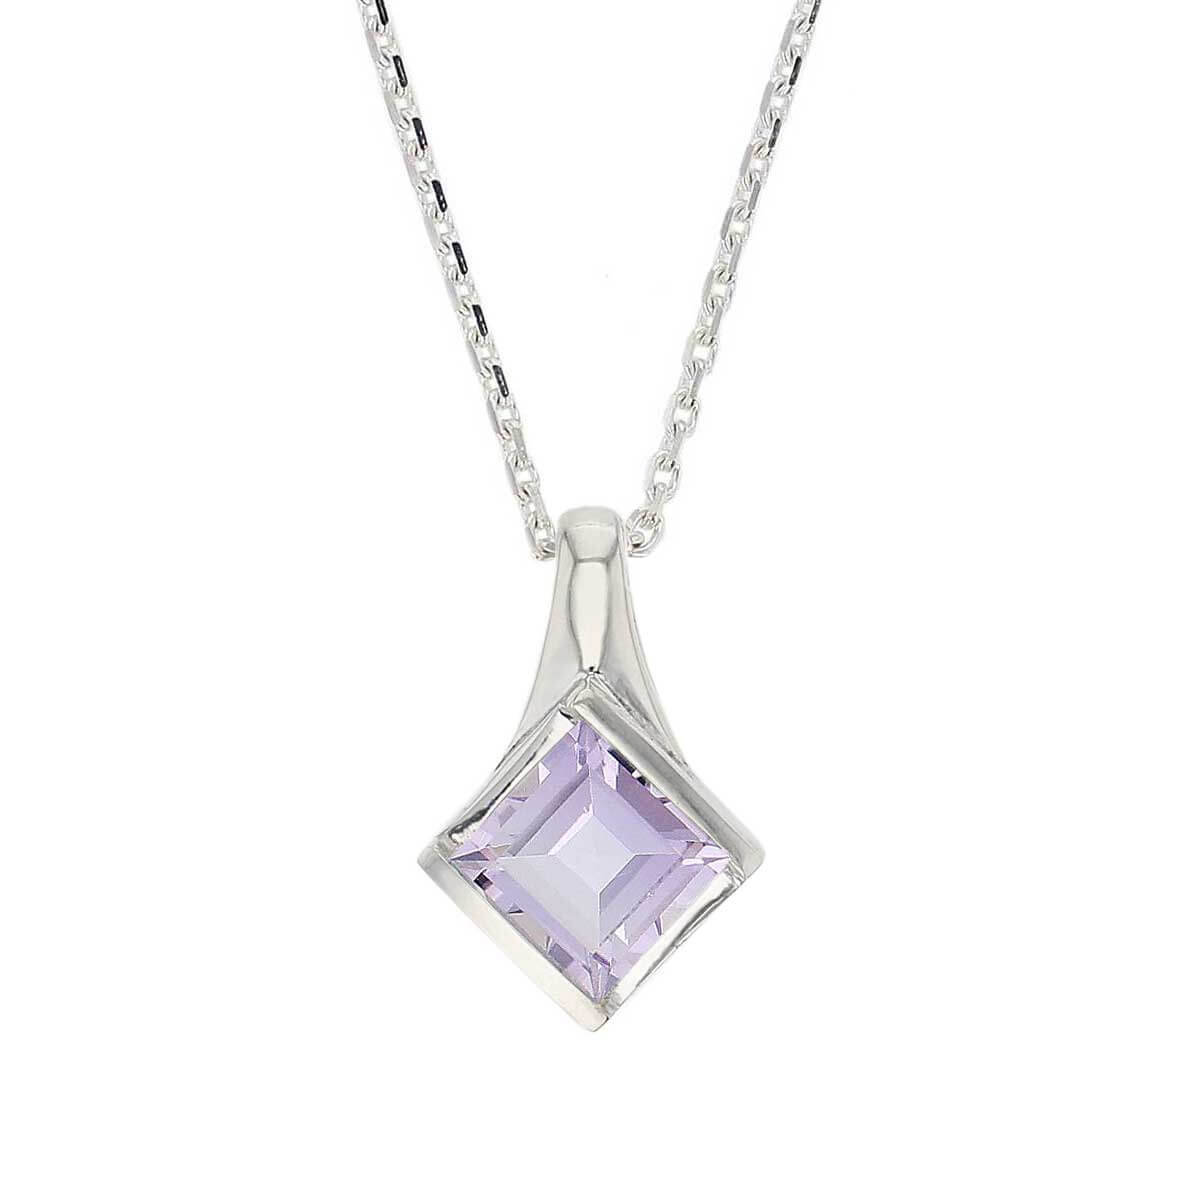 sterling silver princess cut faceted amethyst gemstone pendant, designer jewellery, purple quartz gem, jewelry, handmade by Faller, Londonderry, Northern Ireland, Irish hand crafted, darcy, D’arcy, square